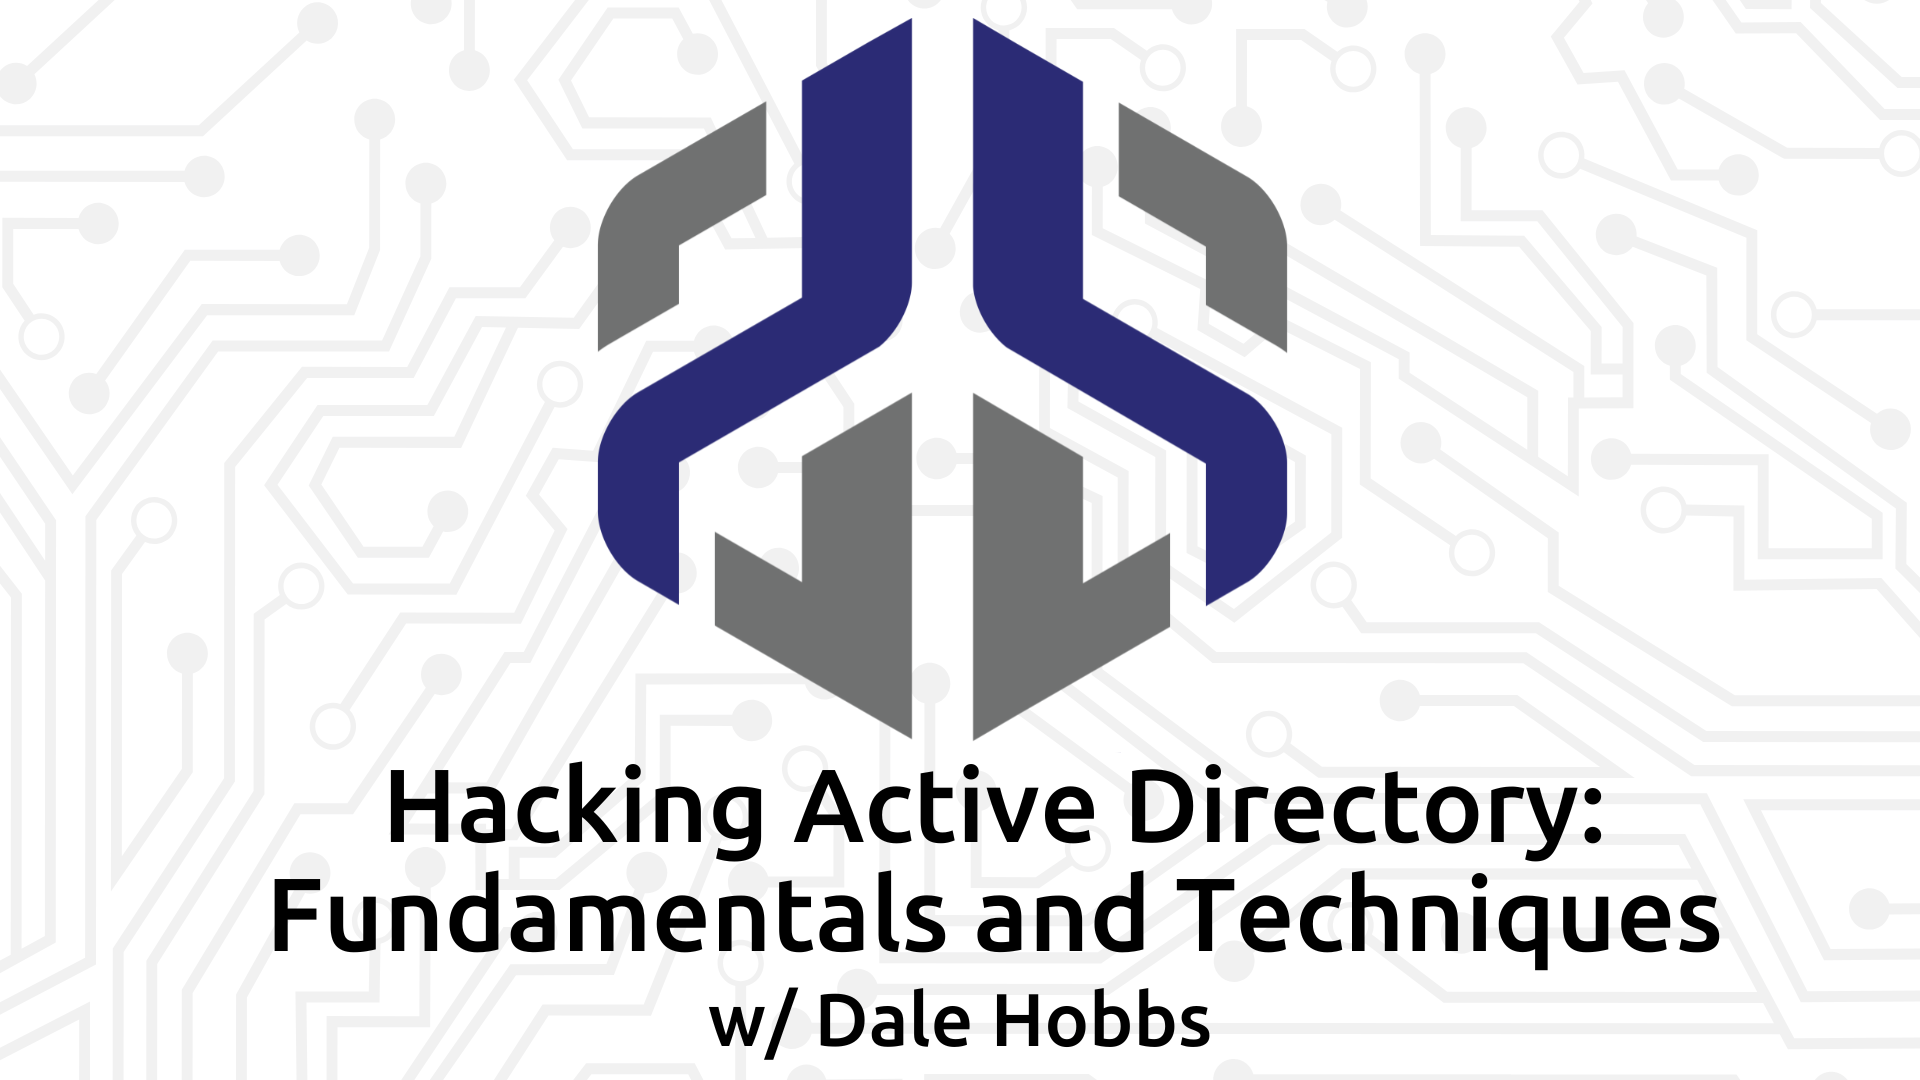 Hacking Active Directory Fundamentals and Techniques w/ Dale Hobbs